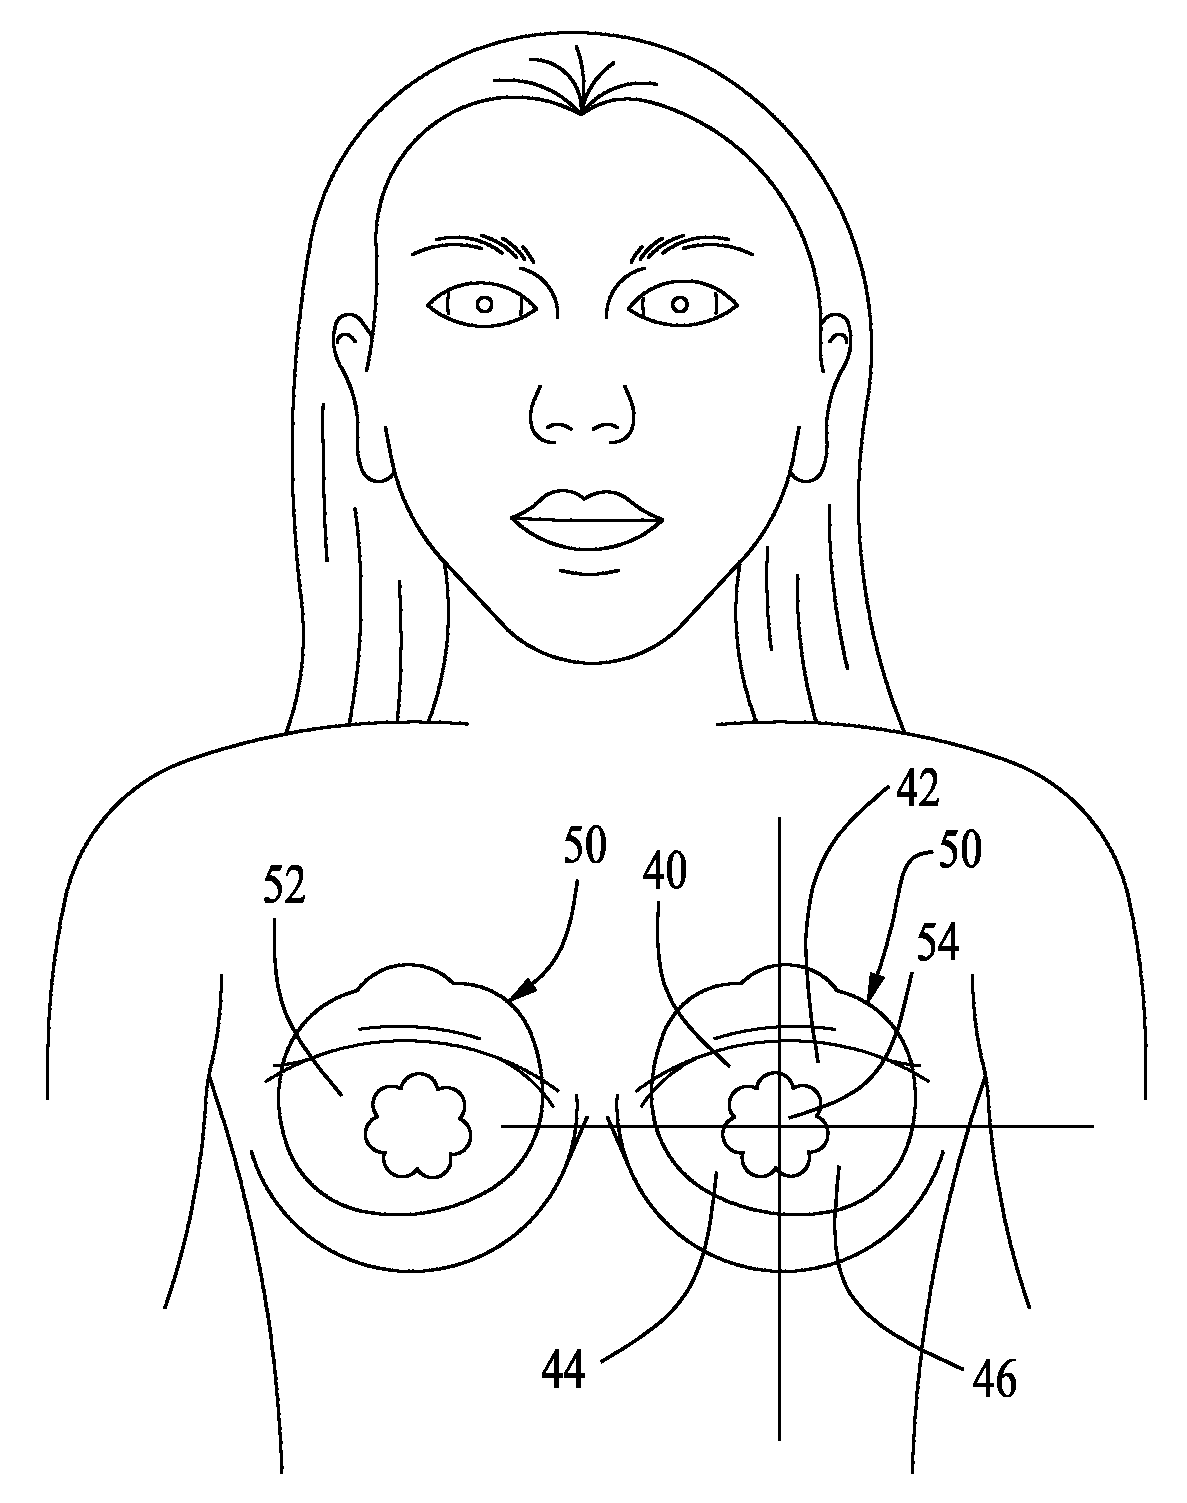 Cosmetic appliances and methods of use